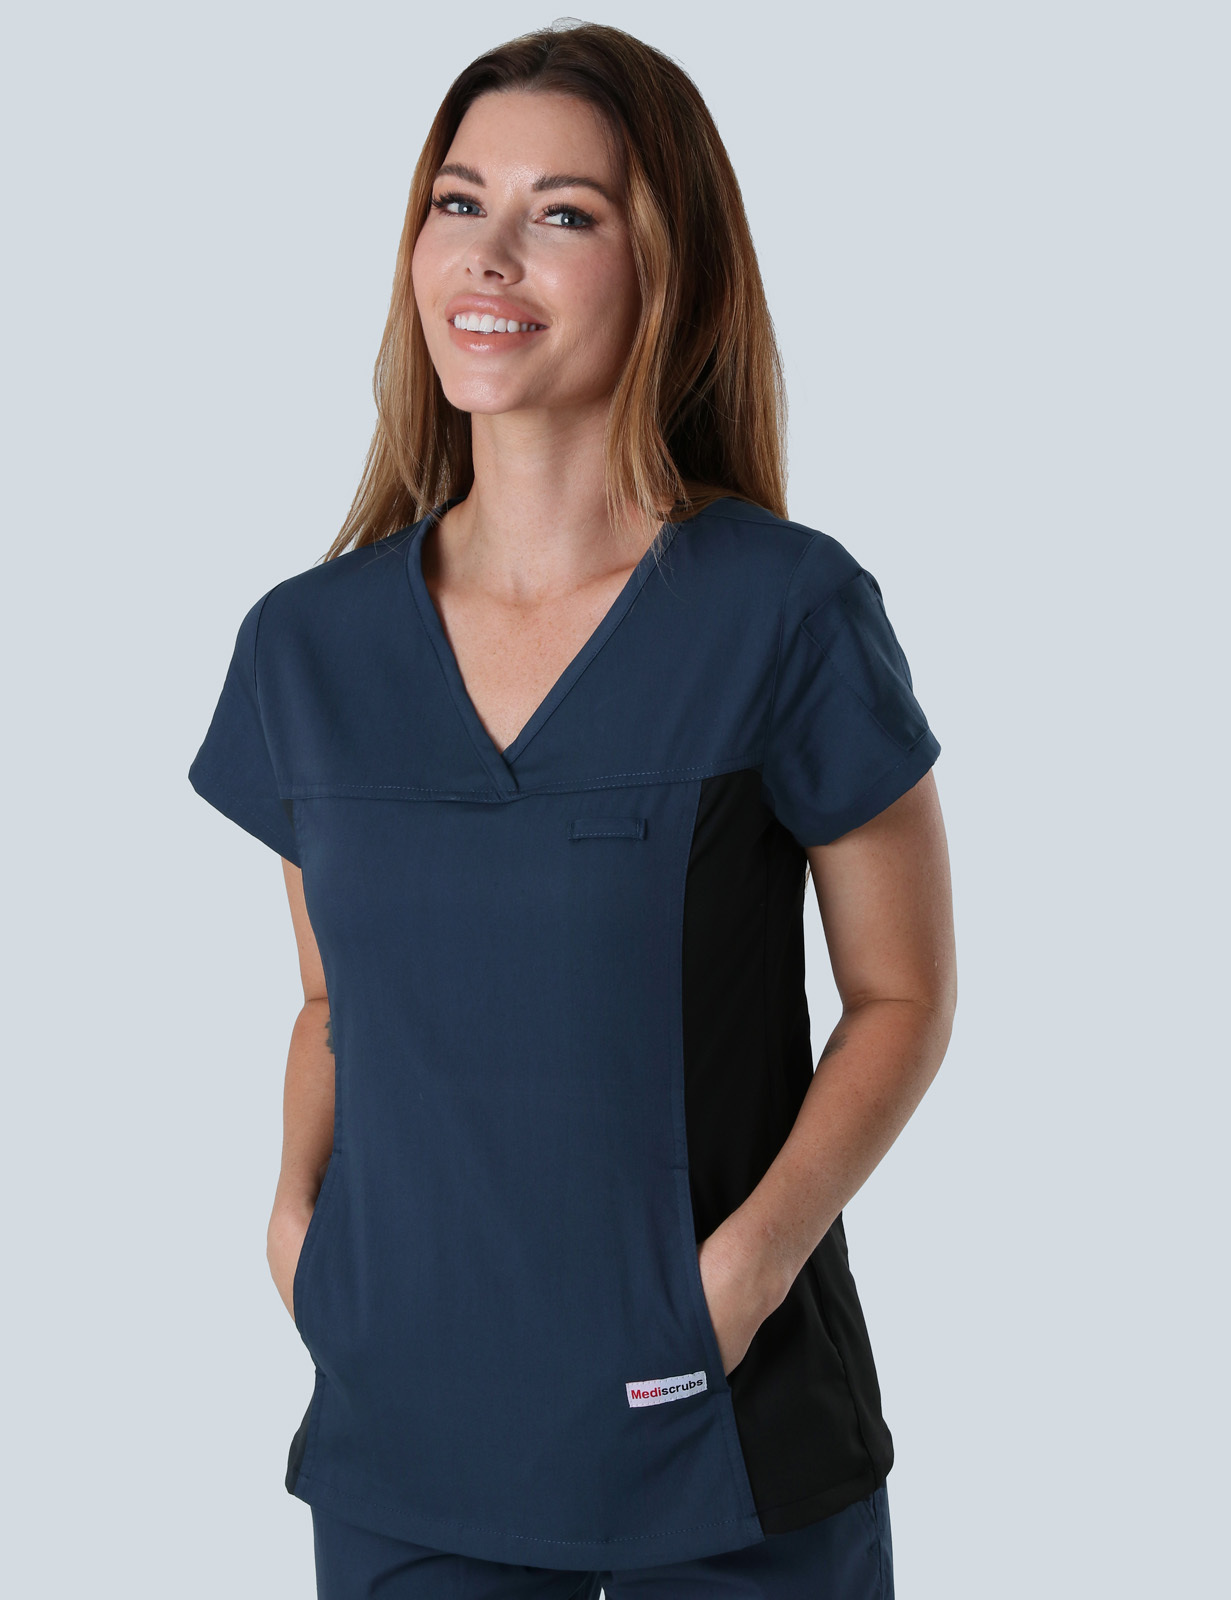 RBWH Neurology Out Patient Department -  Neurophysiology Scientist Uniform Bundle (Women's Fit Spandex Top and Cargo Pants In Navy incl Logos)